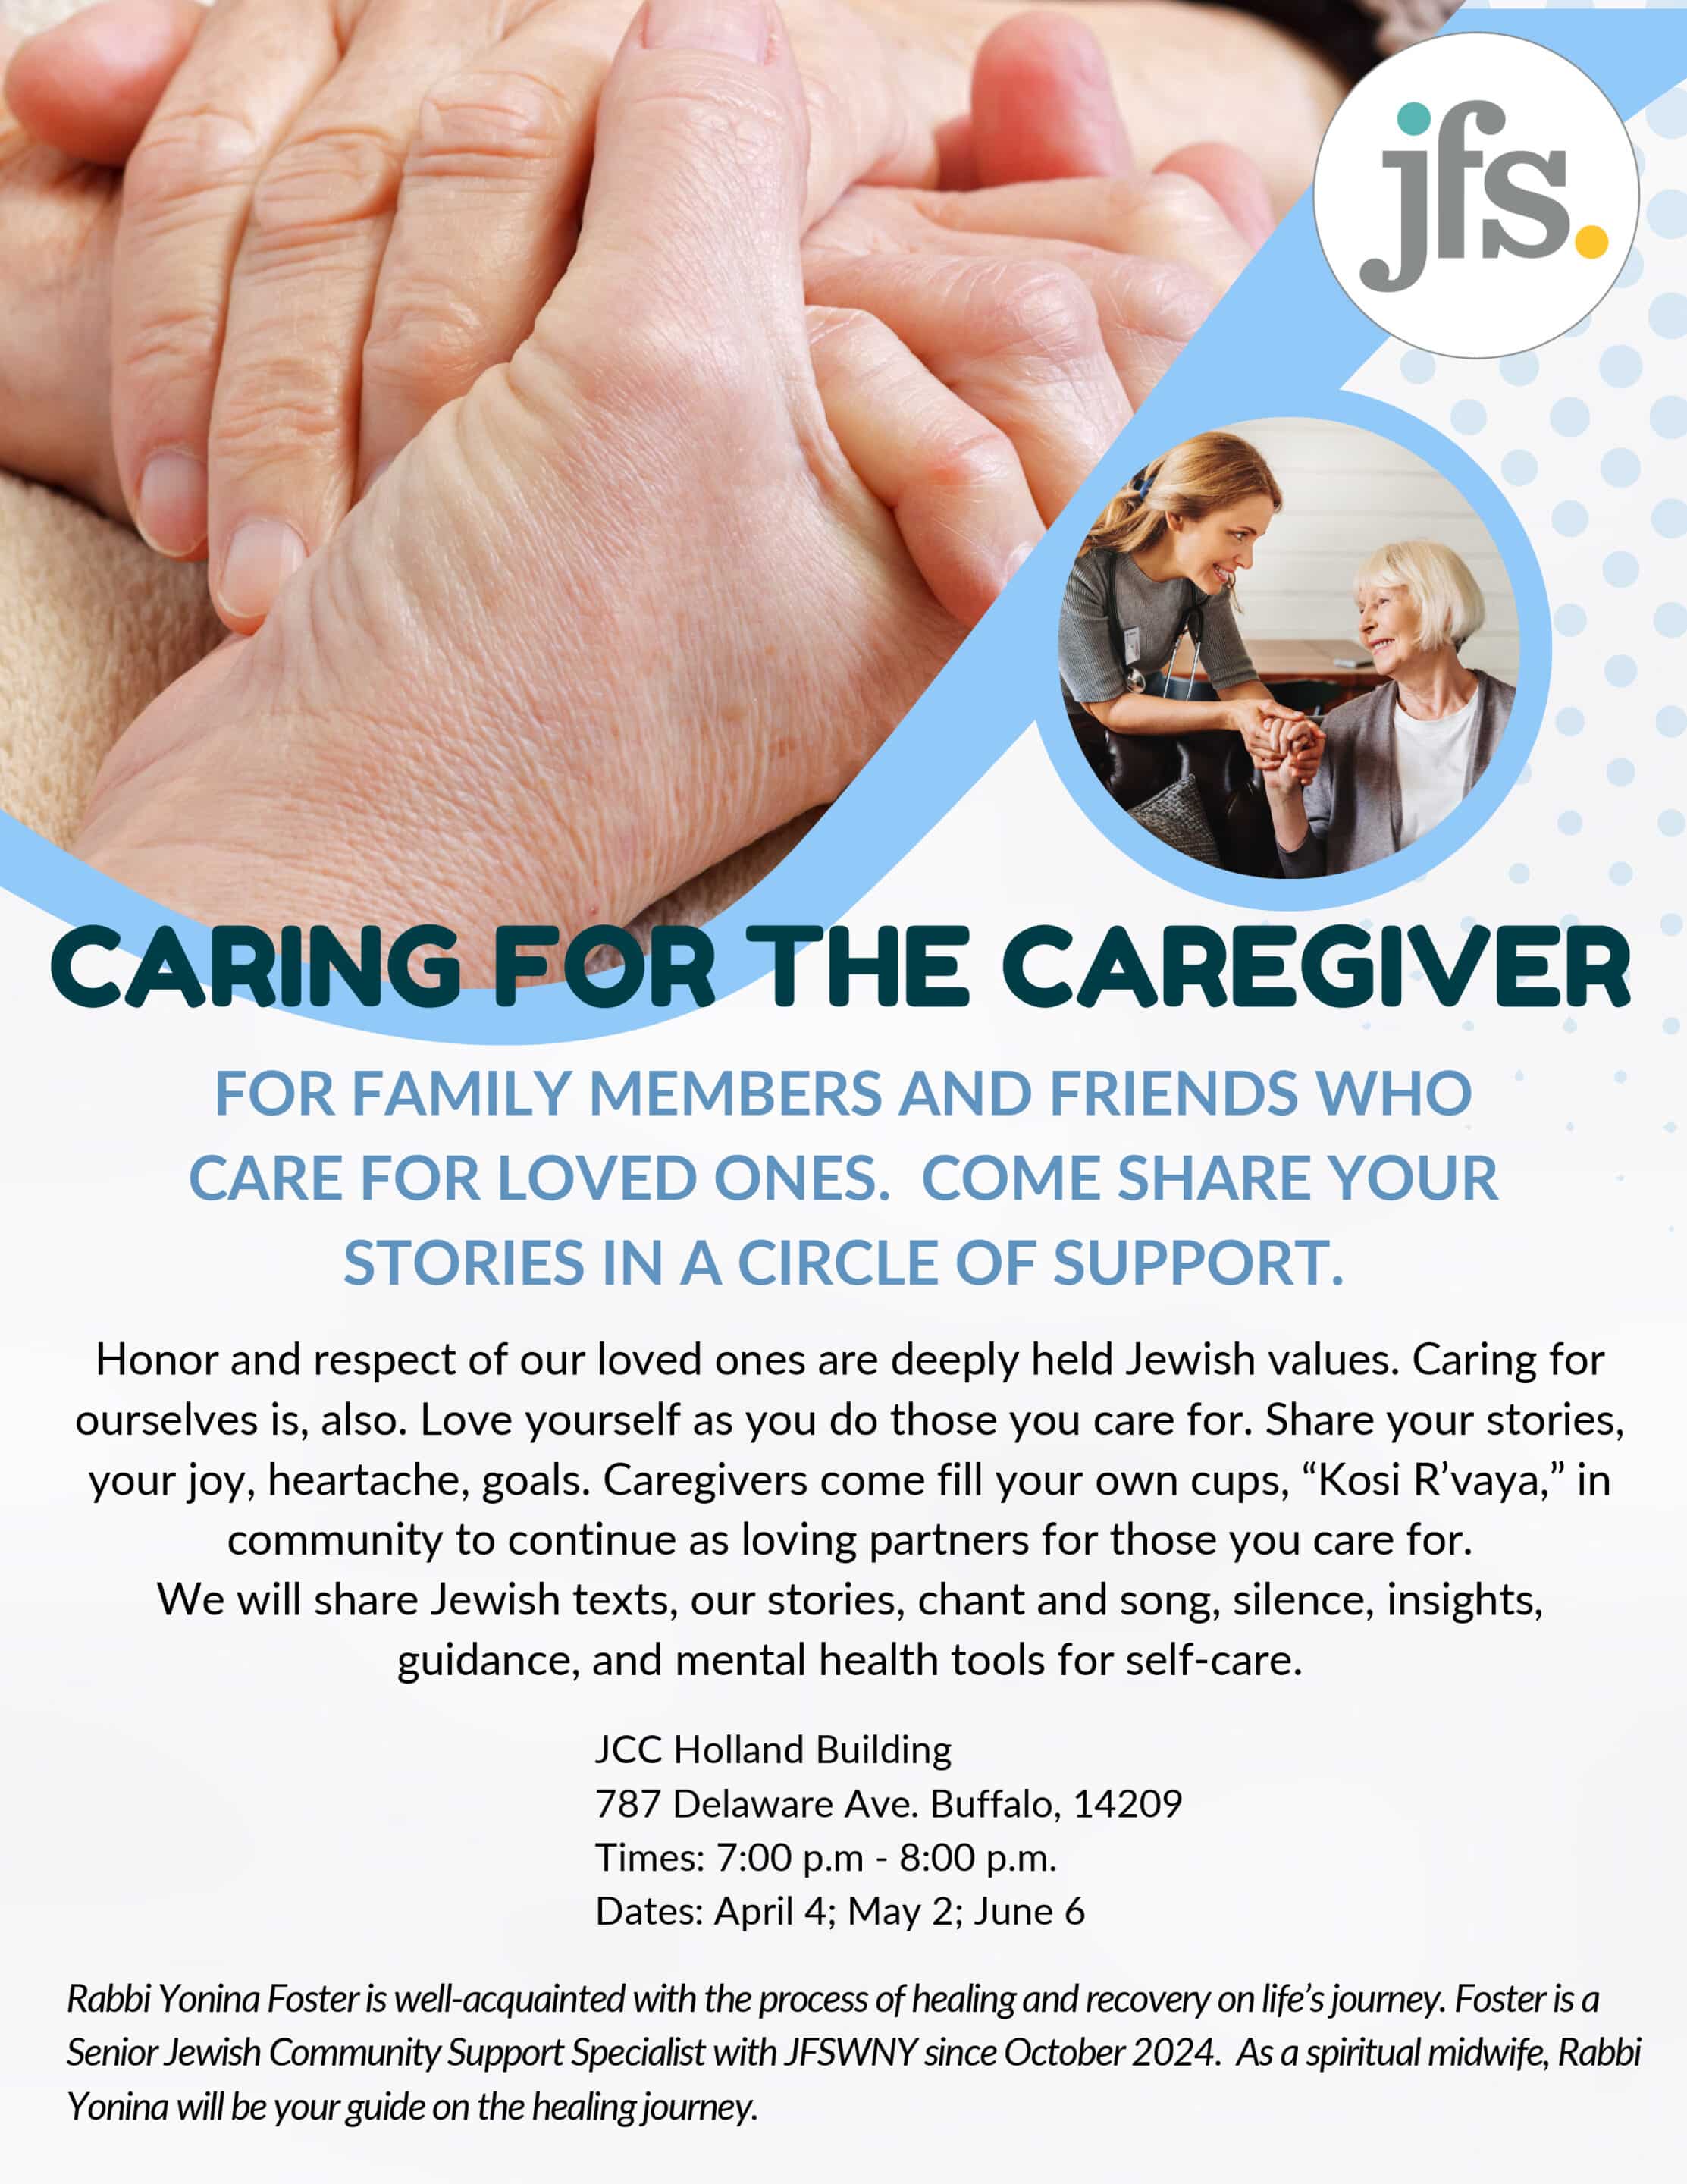 Caring for the Caregiver - Caring for the care Giver scaled